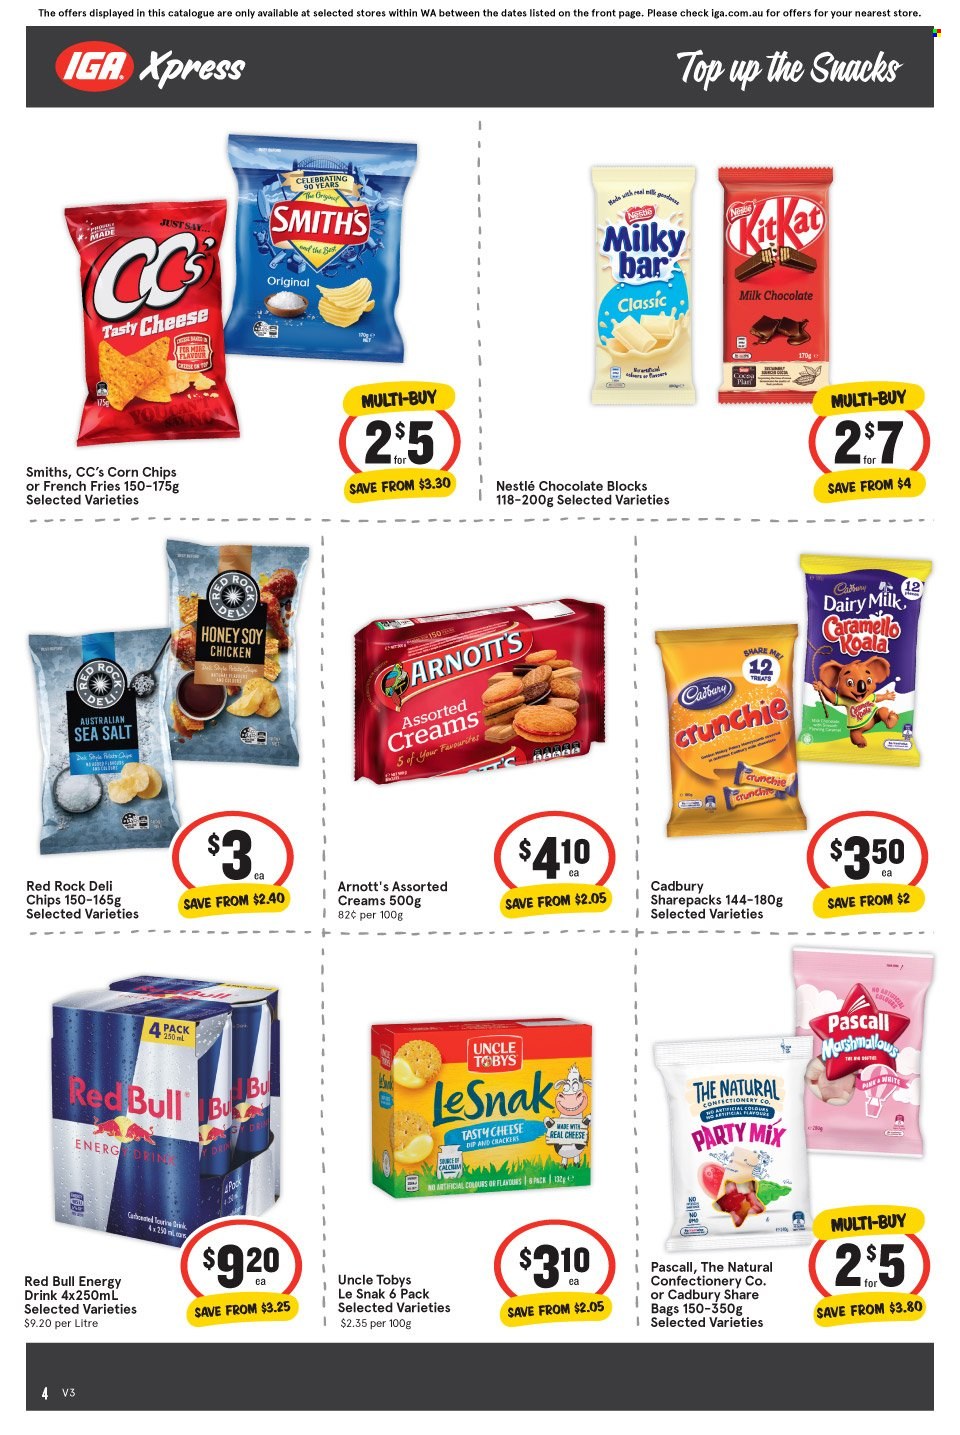 thumbnail - IGA Xpress Catalogue - 12 Jan 2022 - 18 Jan 2022 - Sales products - cheese, potato fries, french fries, milk chocolate, Nestlé, chocolate, snack, marshmallows, Cadbury, Milkybar, Dairy Milk, chips, Smith's, corn chips, Le Snak, honey, energy drink, Red Bull. Page 4.